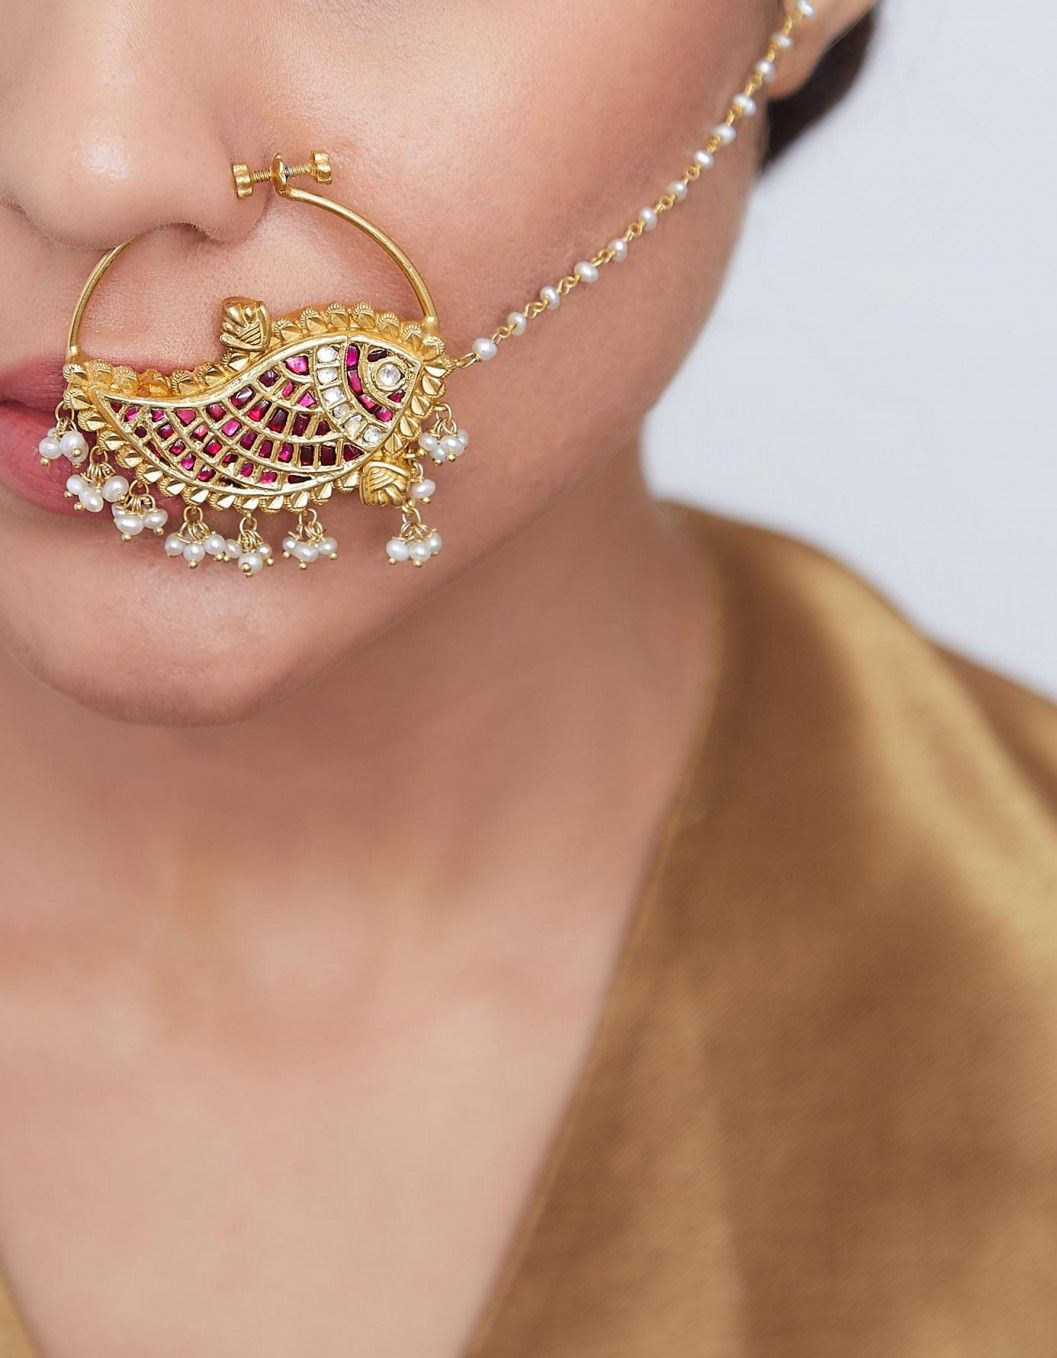 Bridal Nath/indian Bridal Nath/nose Ring/meenakari Nath/kundan Nath/gold  Plated Nath/nath With Chain/left Piercing Required - Etsy